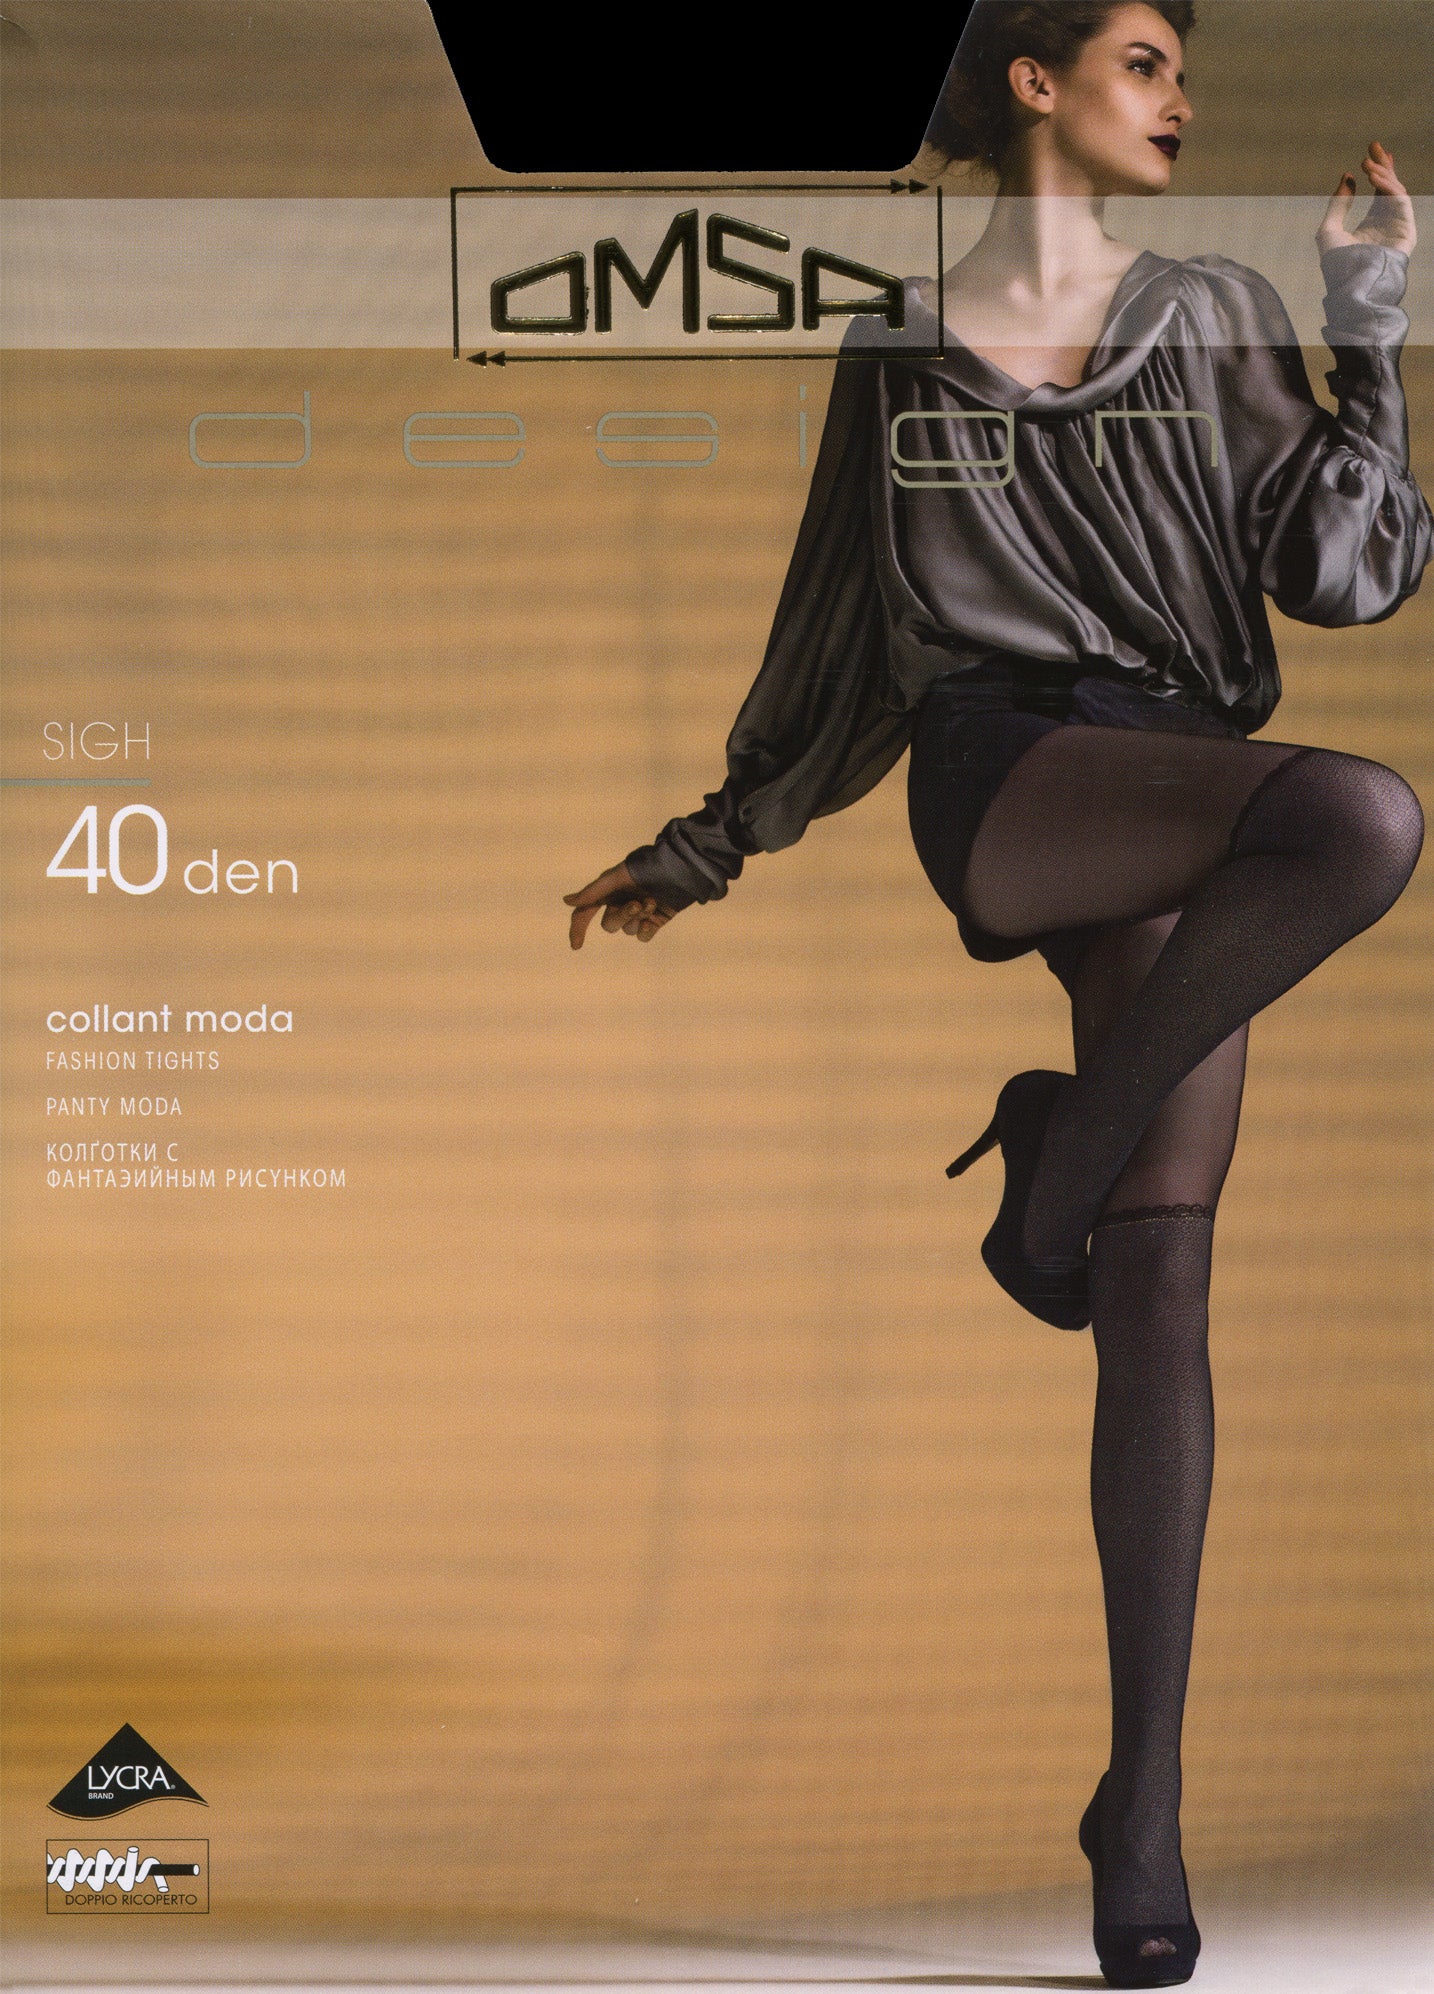 Omsa 3228 Sigh Collant - mock over the knee sock effect fashion tights with silver lurex, available in black/grey and purple